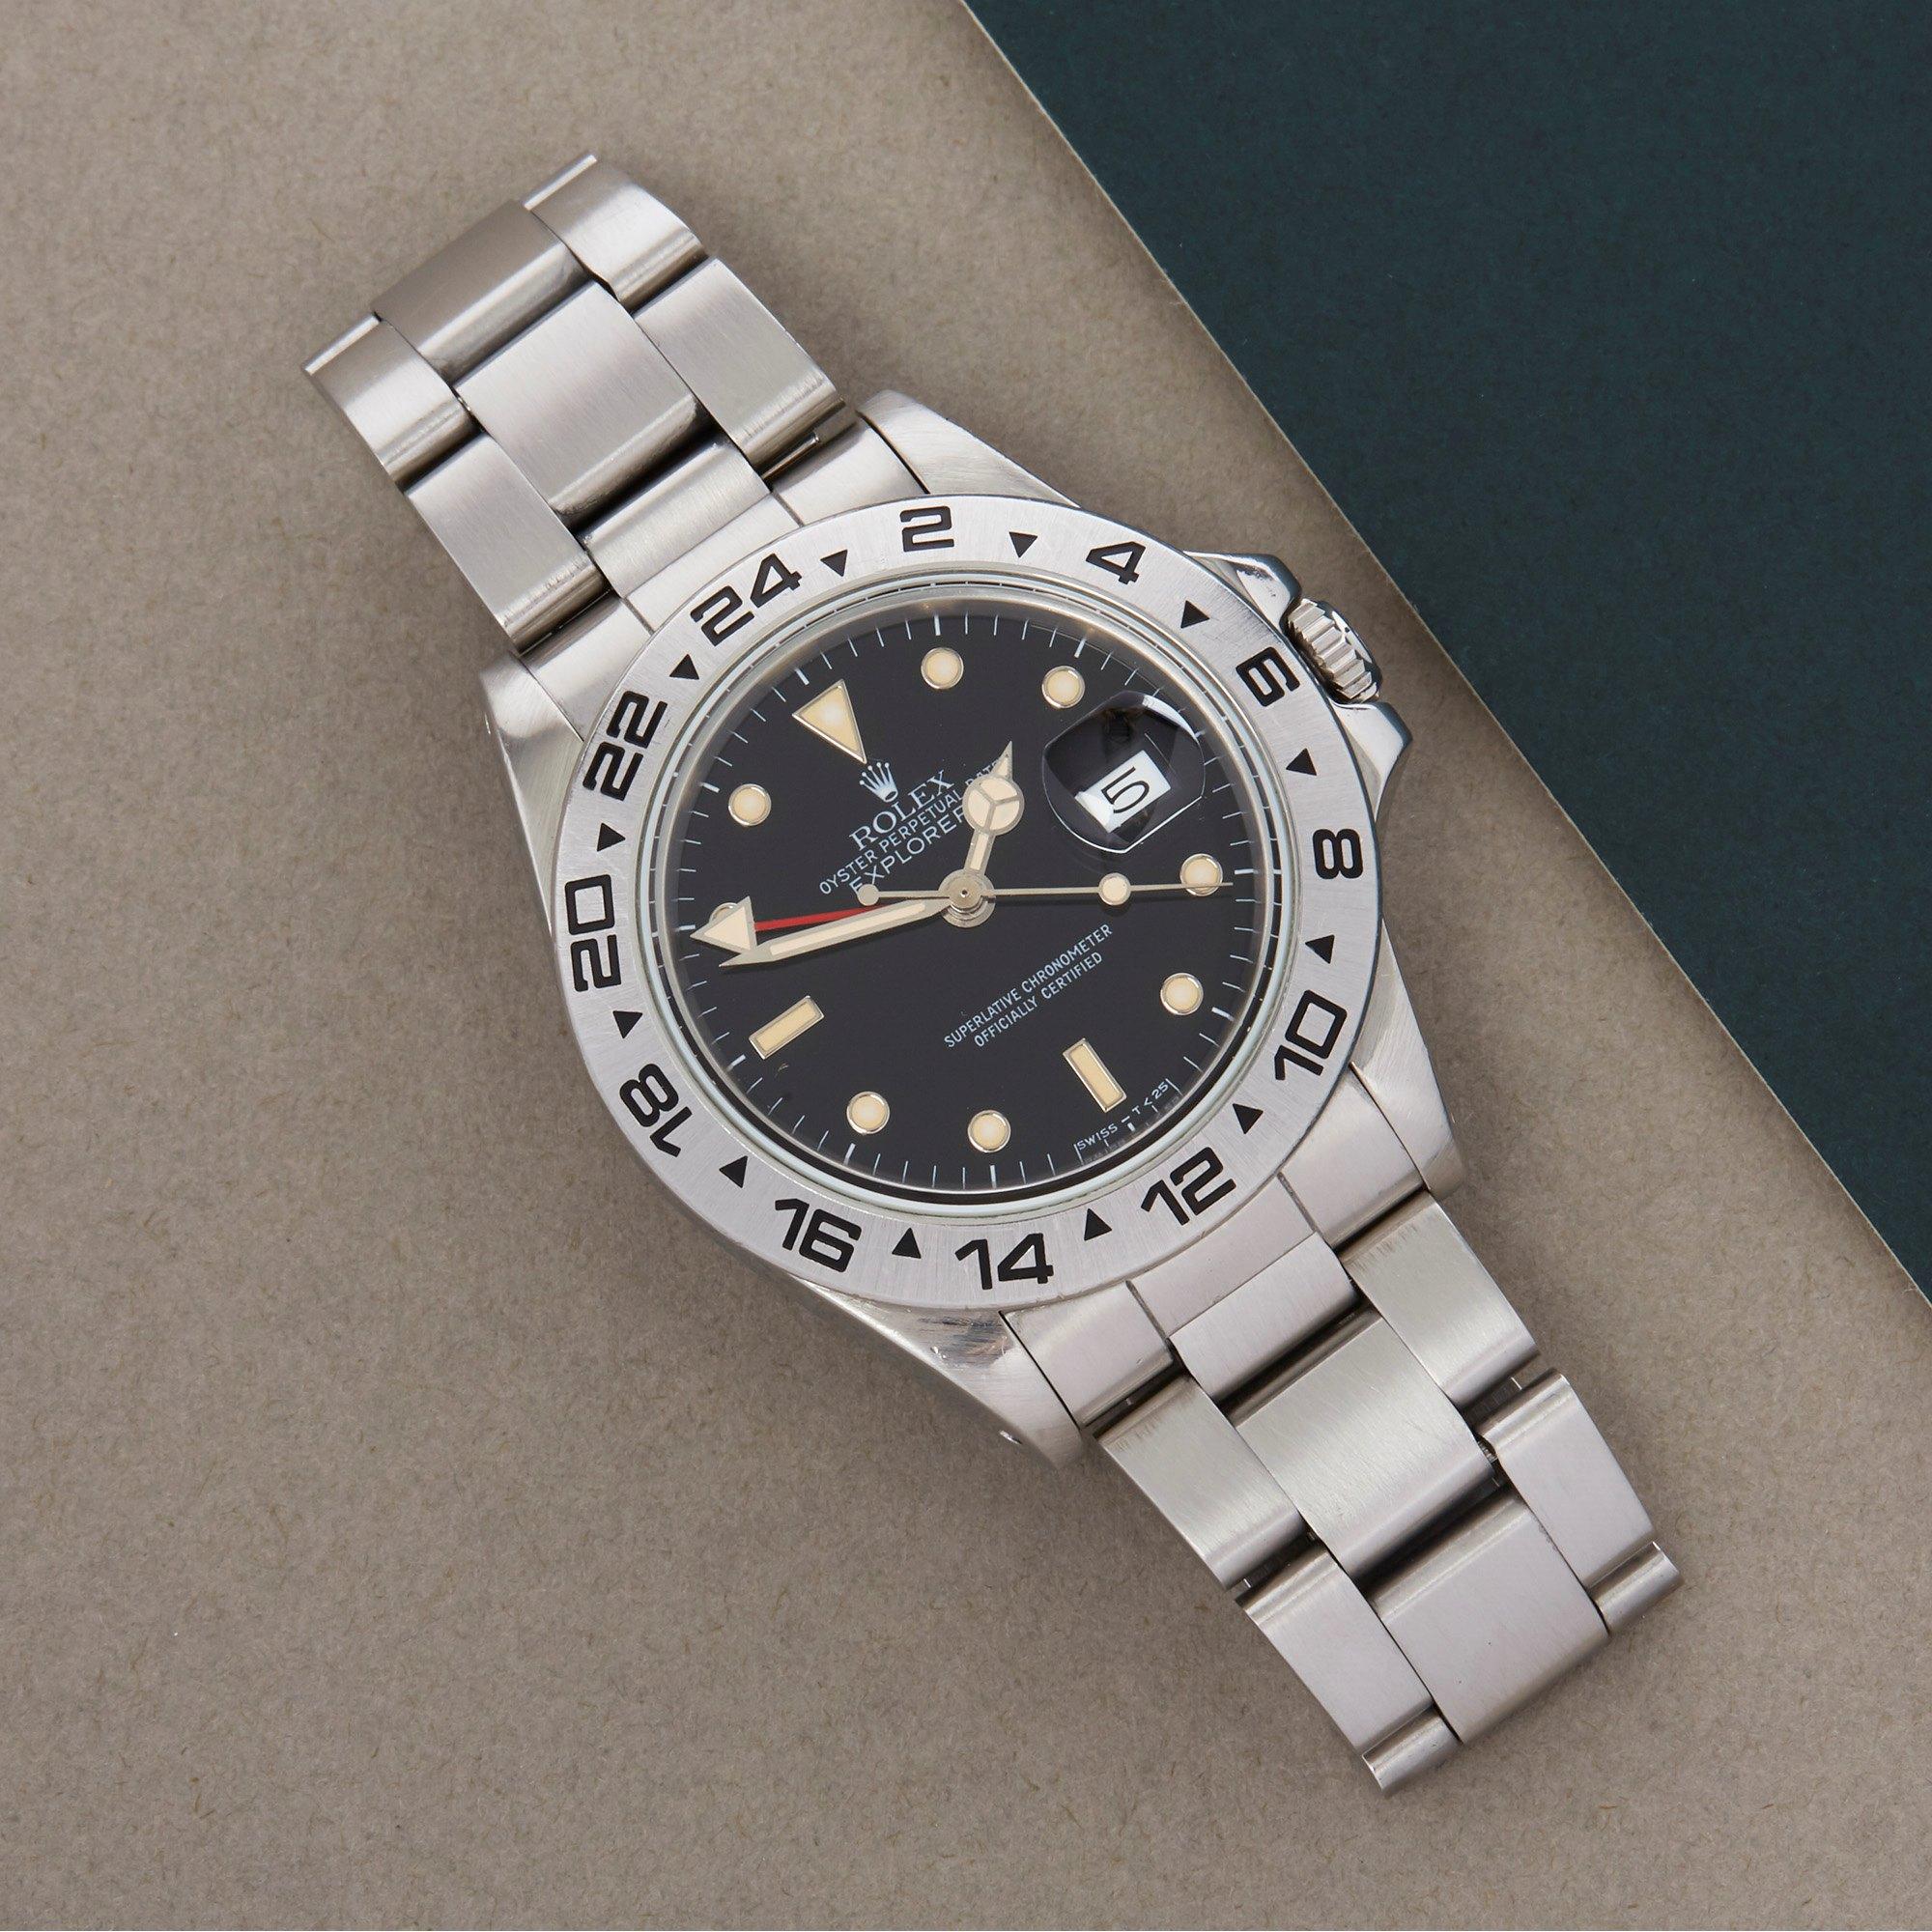 Xupes Reference: W007772
Manufacturer: Rolex
Model: Explorer II
Model Variant: 0
Model Number: 16550
Age: 28-11-1987
Gender: Men
Complete With: Box, Manuals, Rolex Service Papers Dated 2002 & 2014 & Punched Guarantee
Dial: Black Baton
Glass: